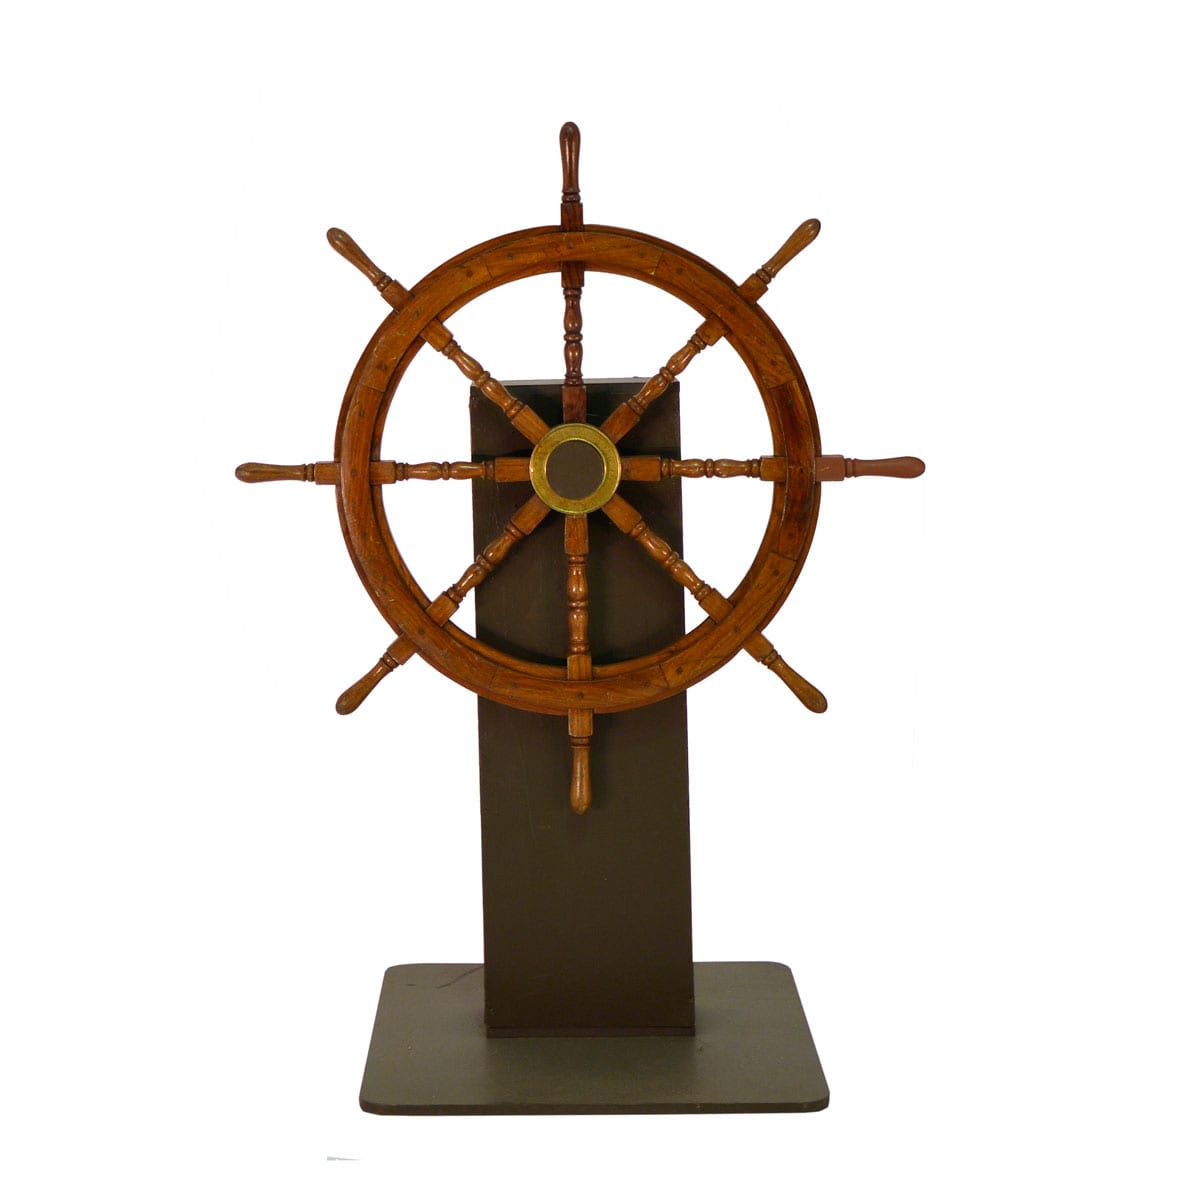 https://www.sydneyprops.com.au/wp-content/uploads/2014/05/ships_wheel_without_bell.jpg